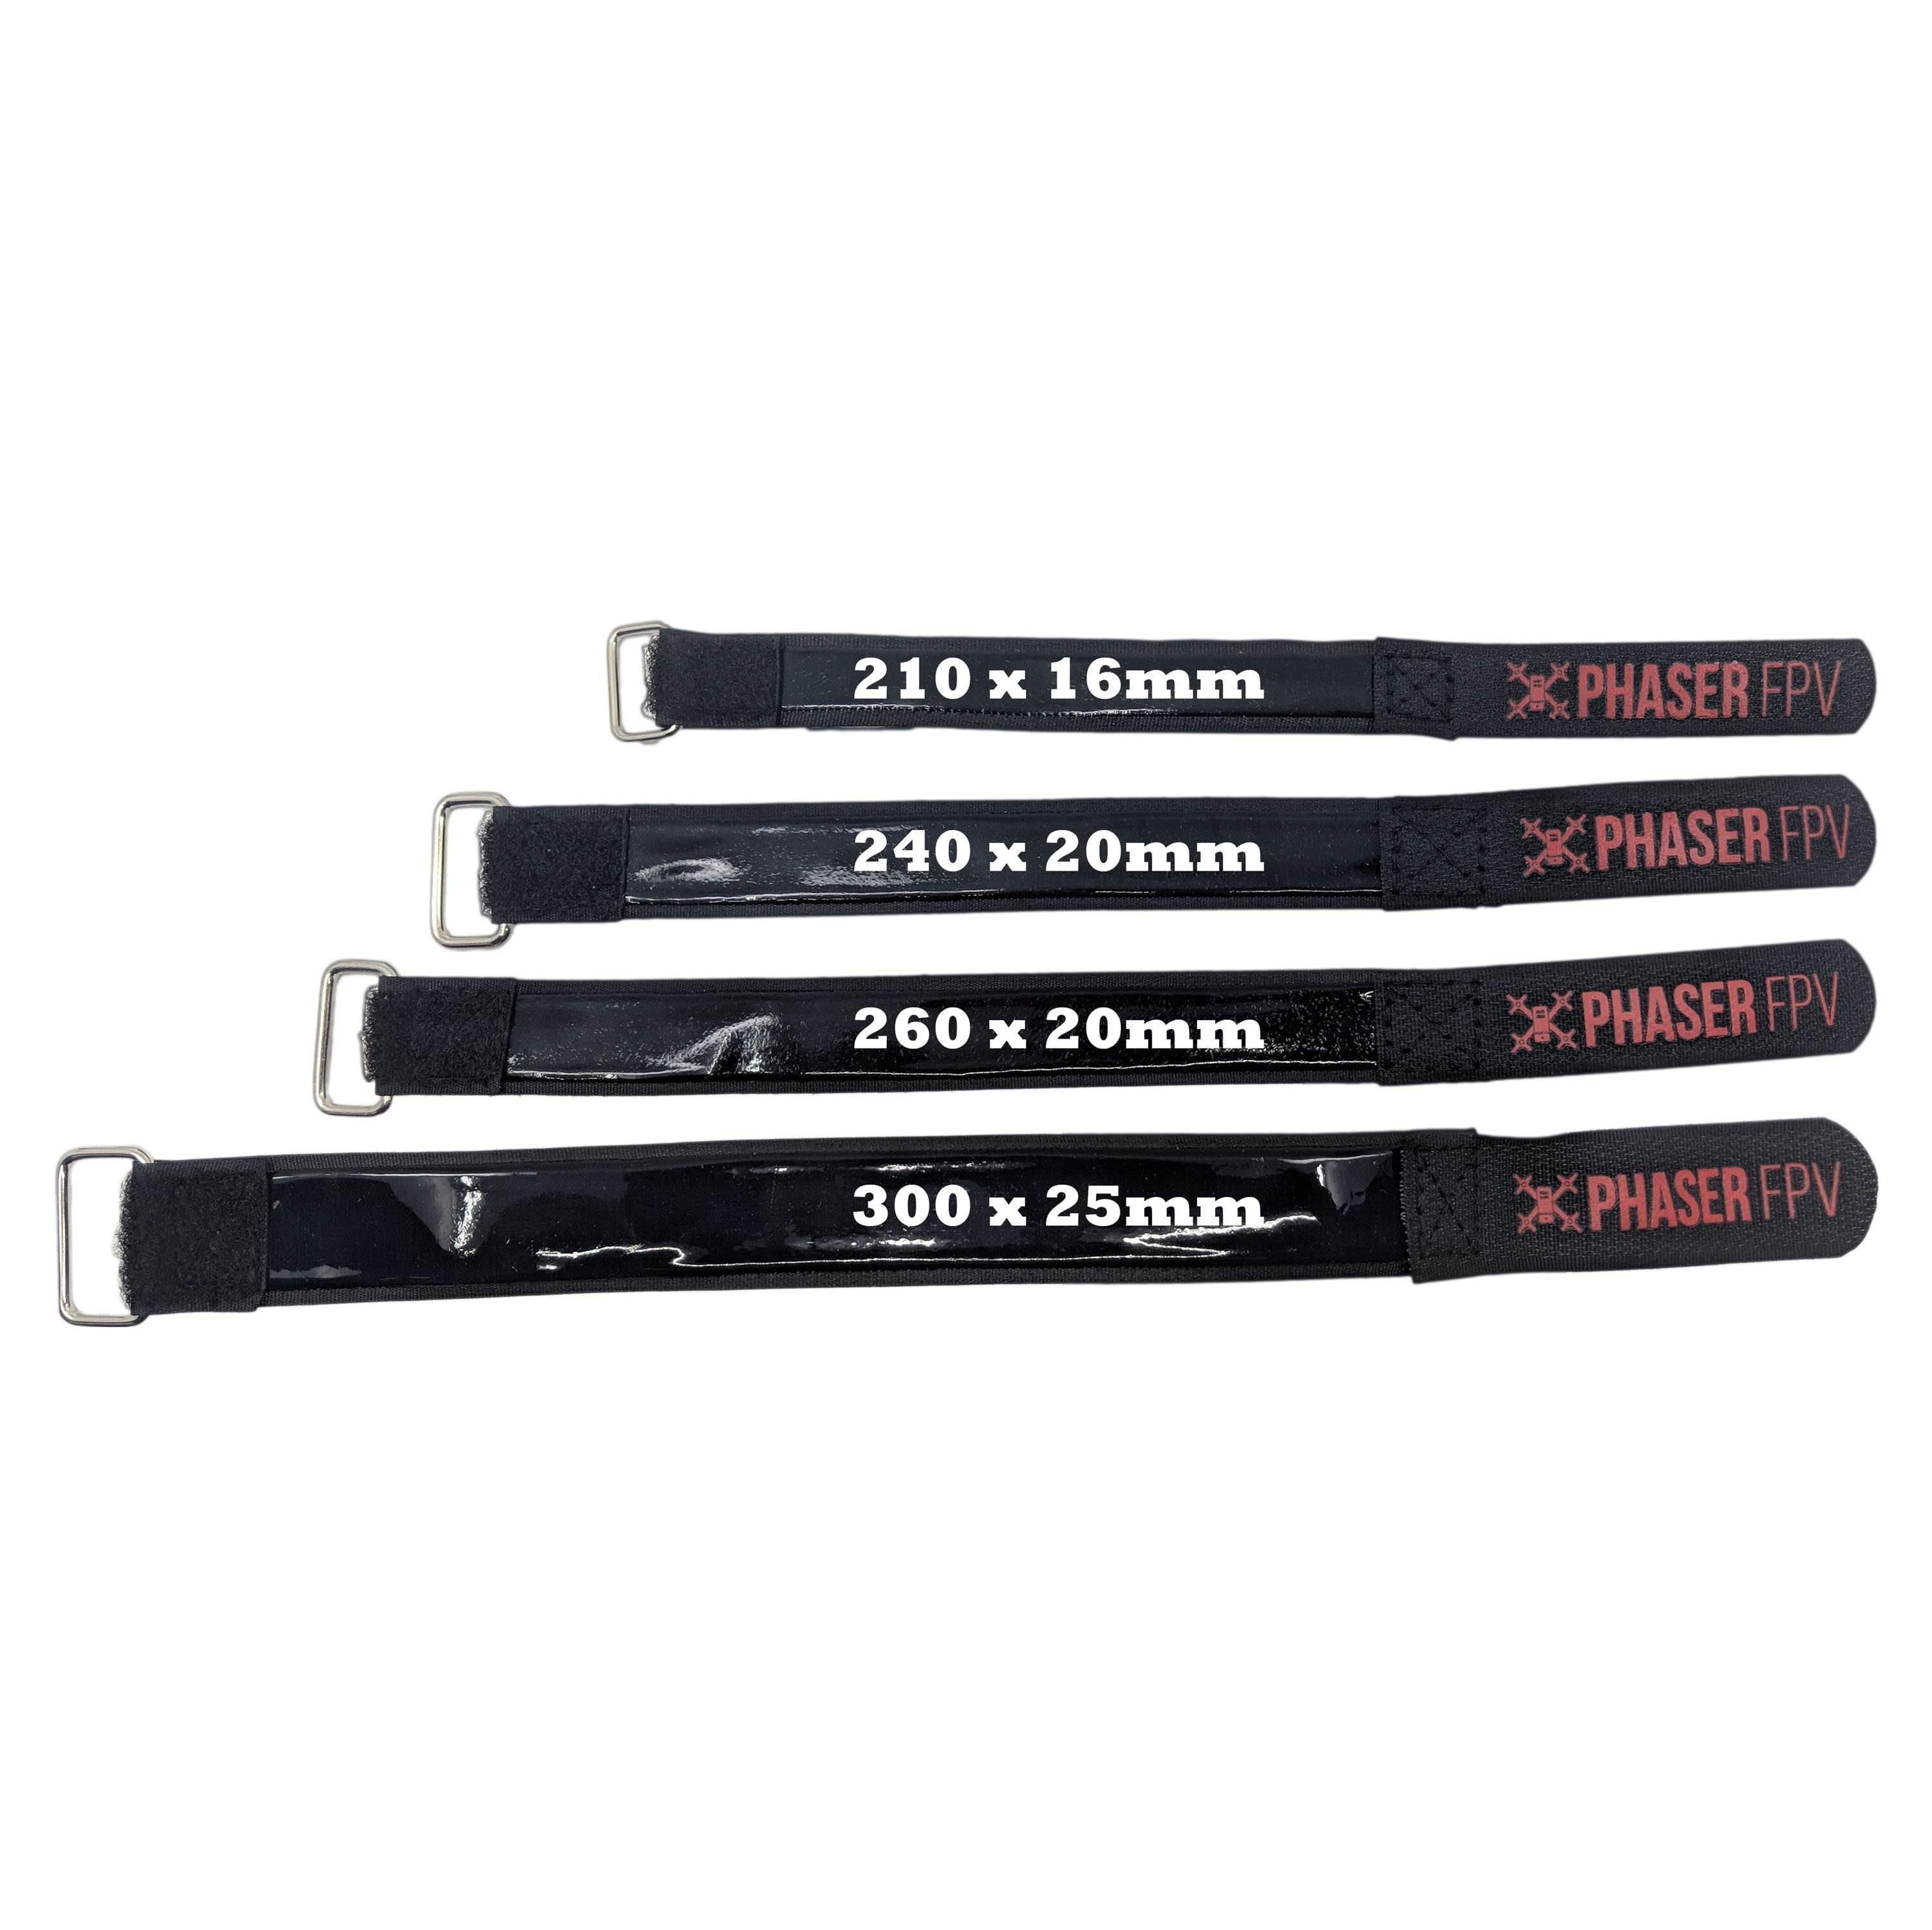 Lipo Battery Strap 210x16mm With Non-slip Coating Phaser FPV Branded